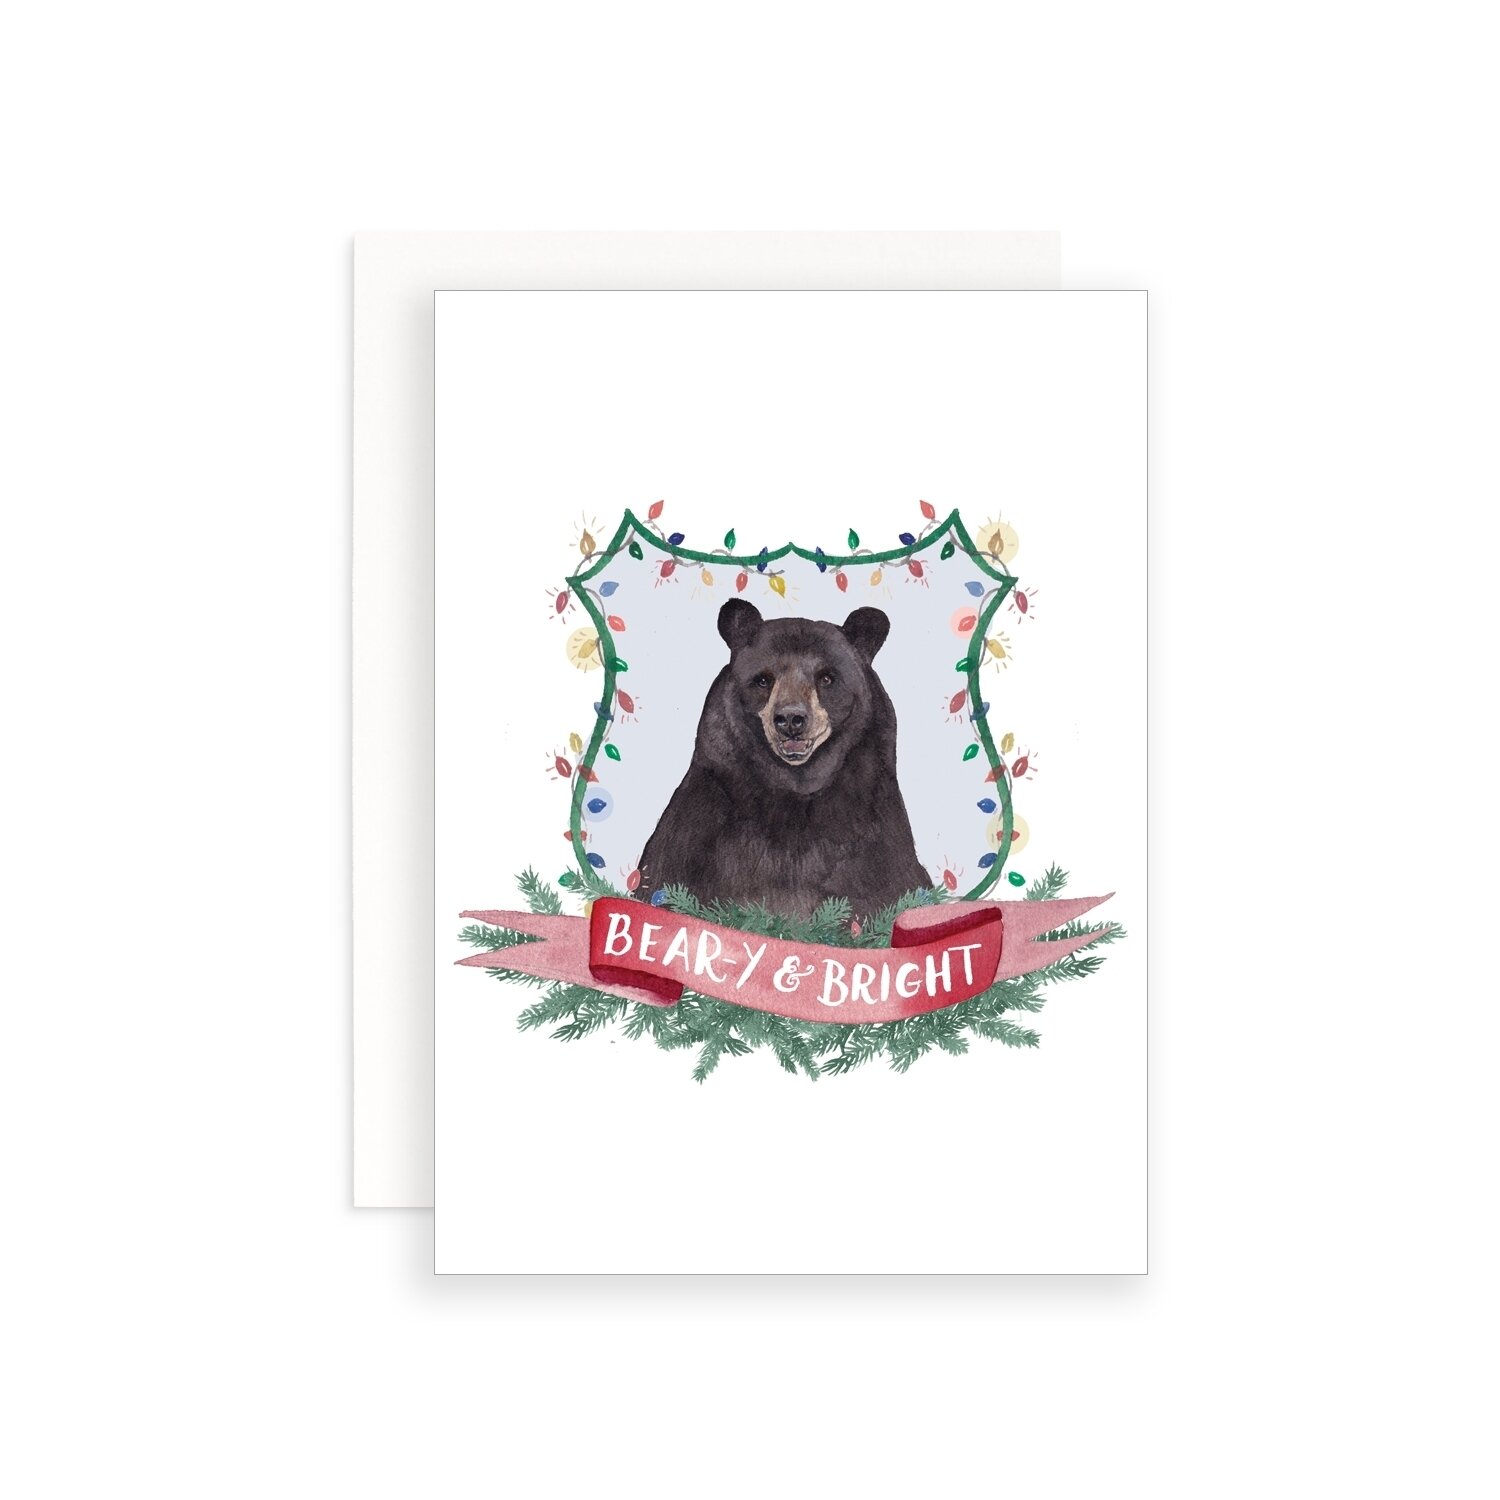 Beary and Bright Greeting Card